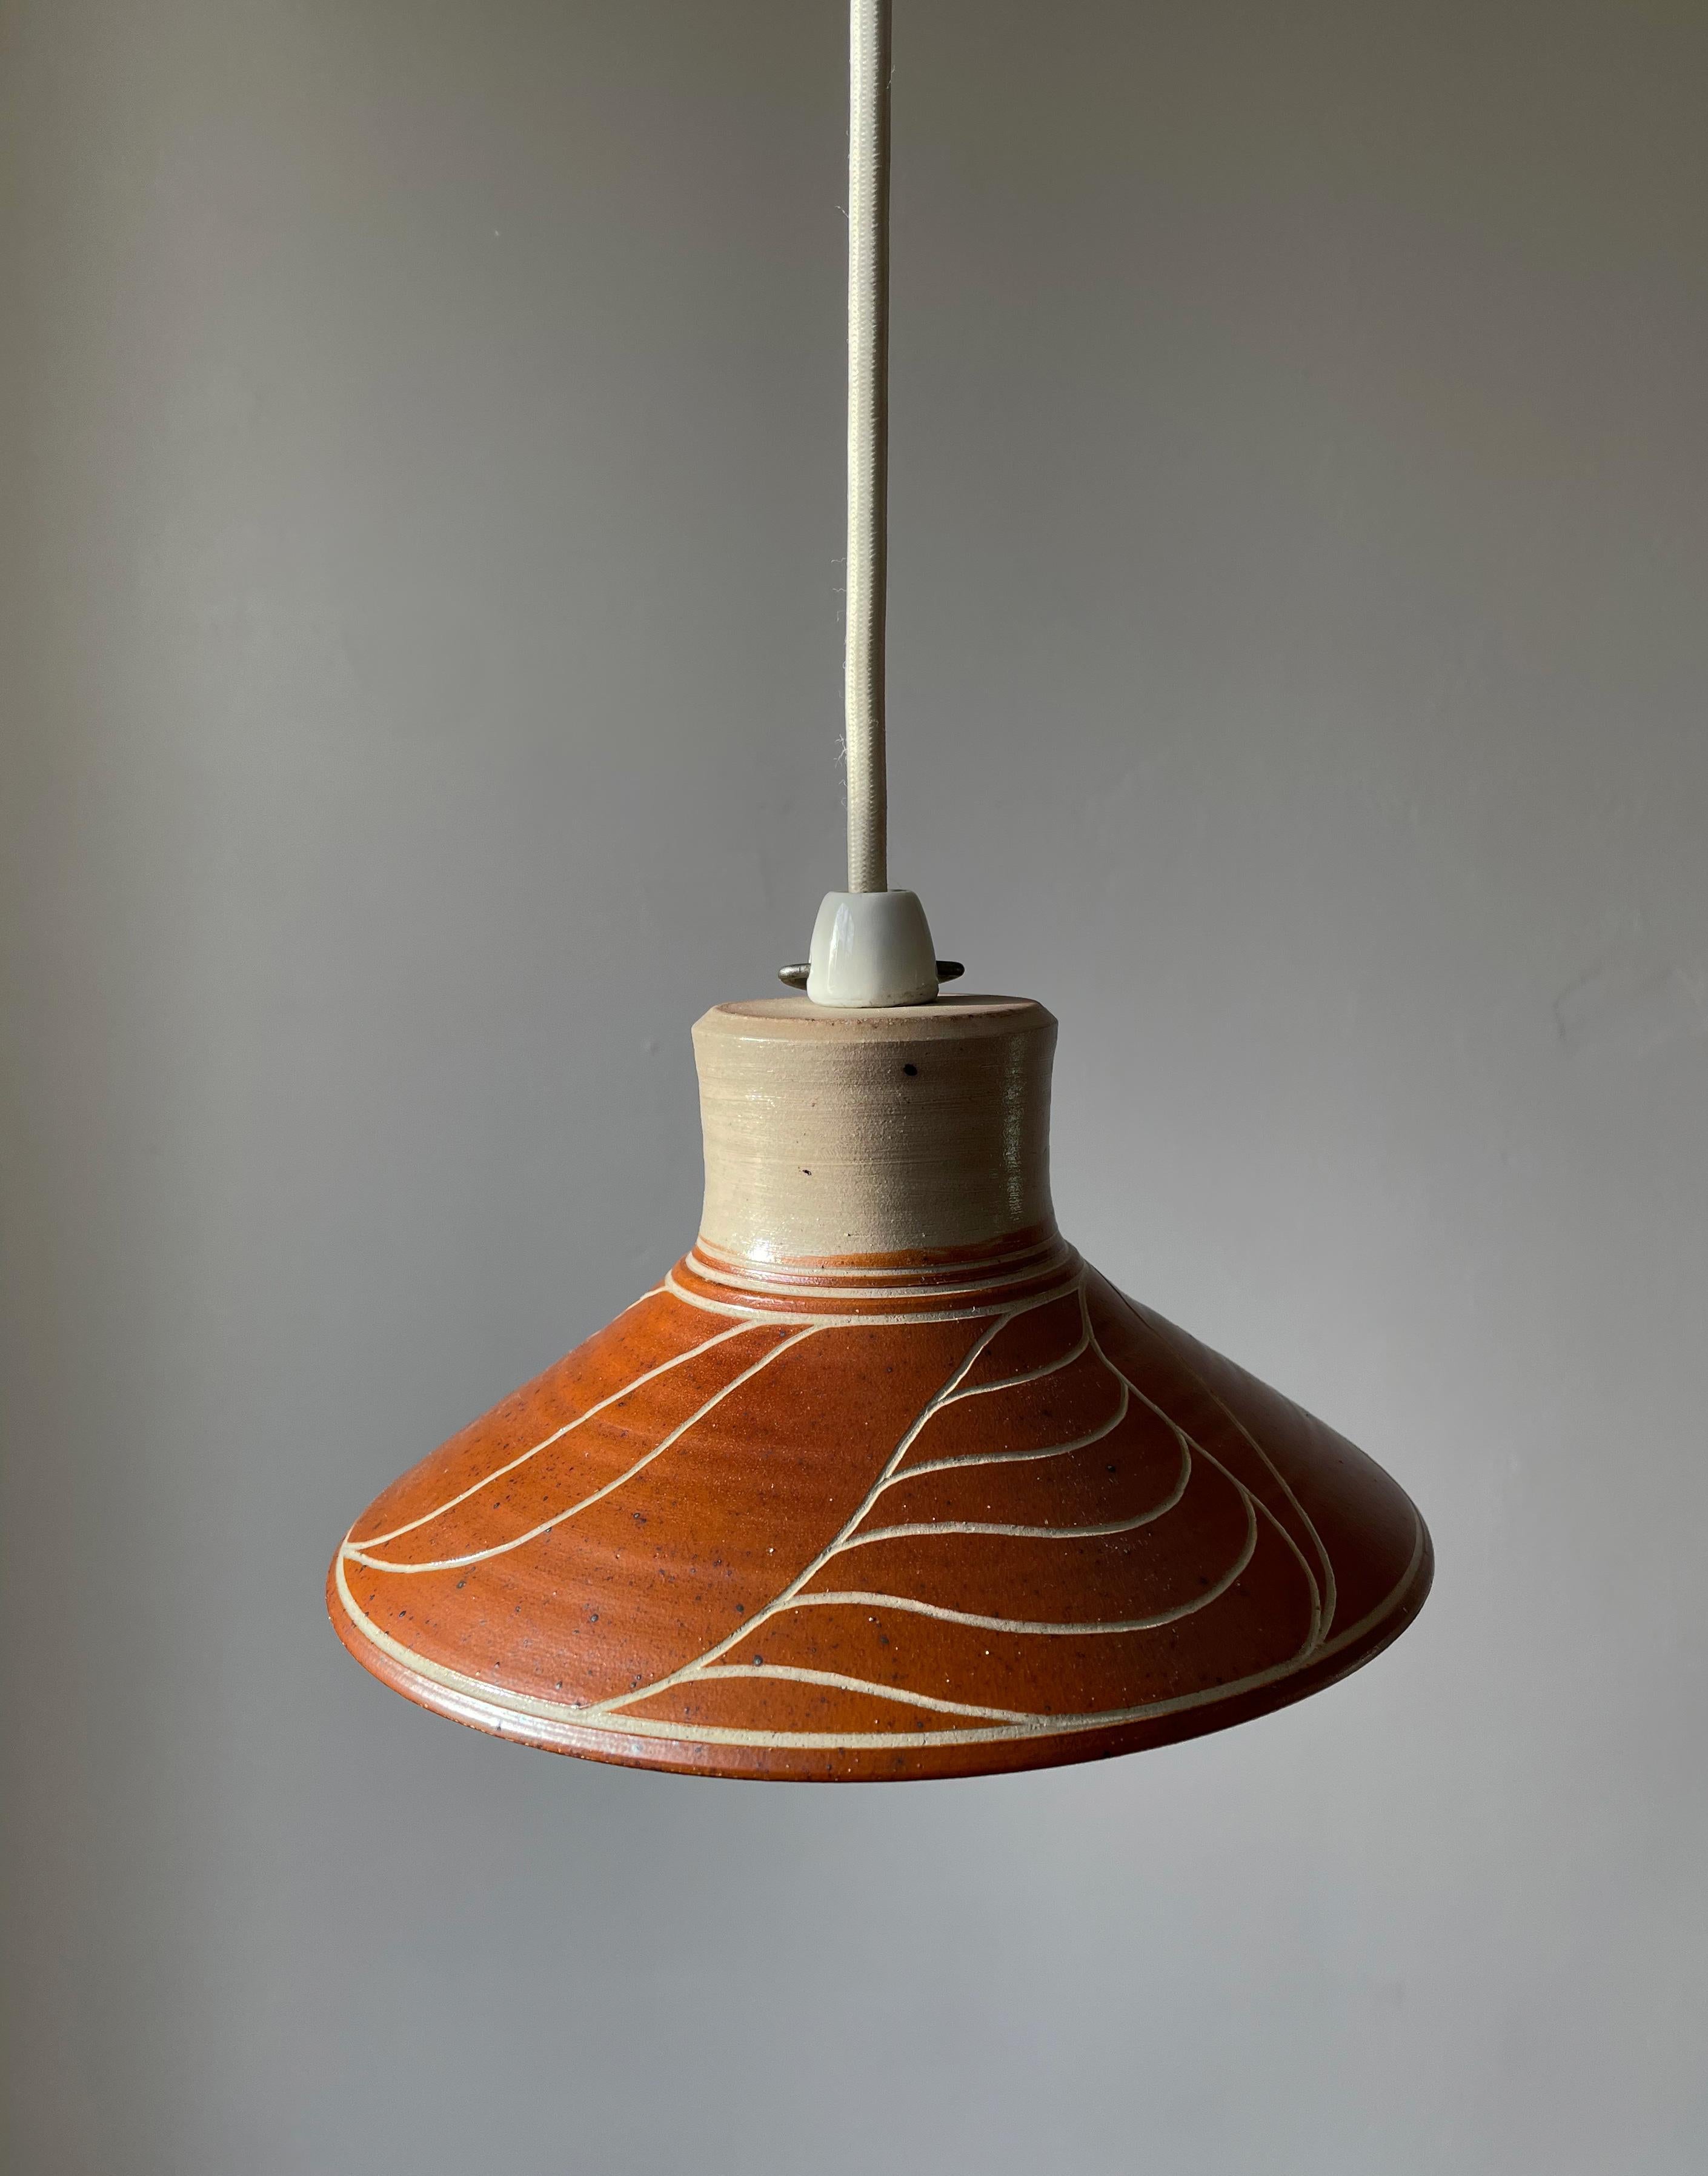 Danish organic modern ceramic pendant with warm brown terracotta glaze and incised leaf-like lined decorations over the beige grey clay with clear glaze. Manufactured in Denmark in the late 1970s. Beautiful vintage condition. Rewired with white